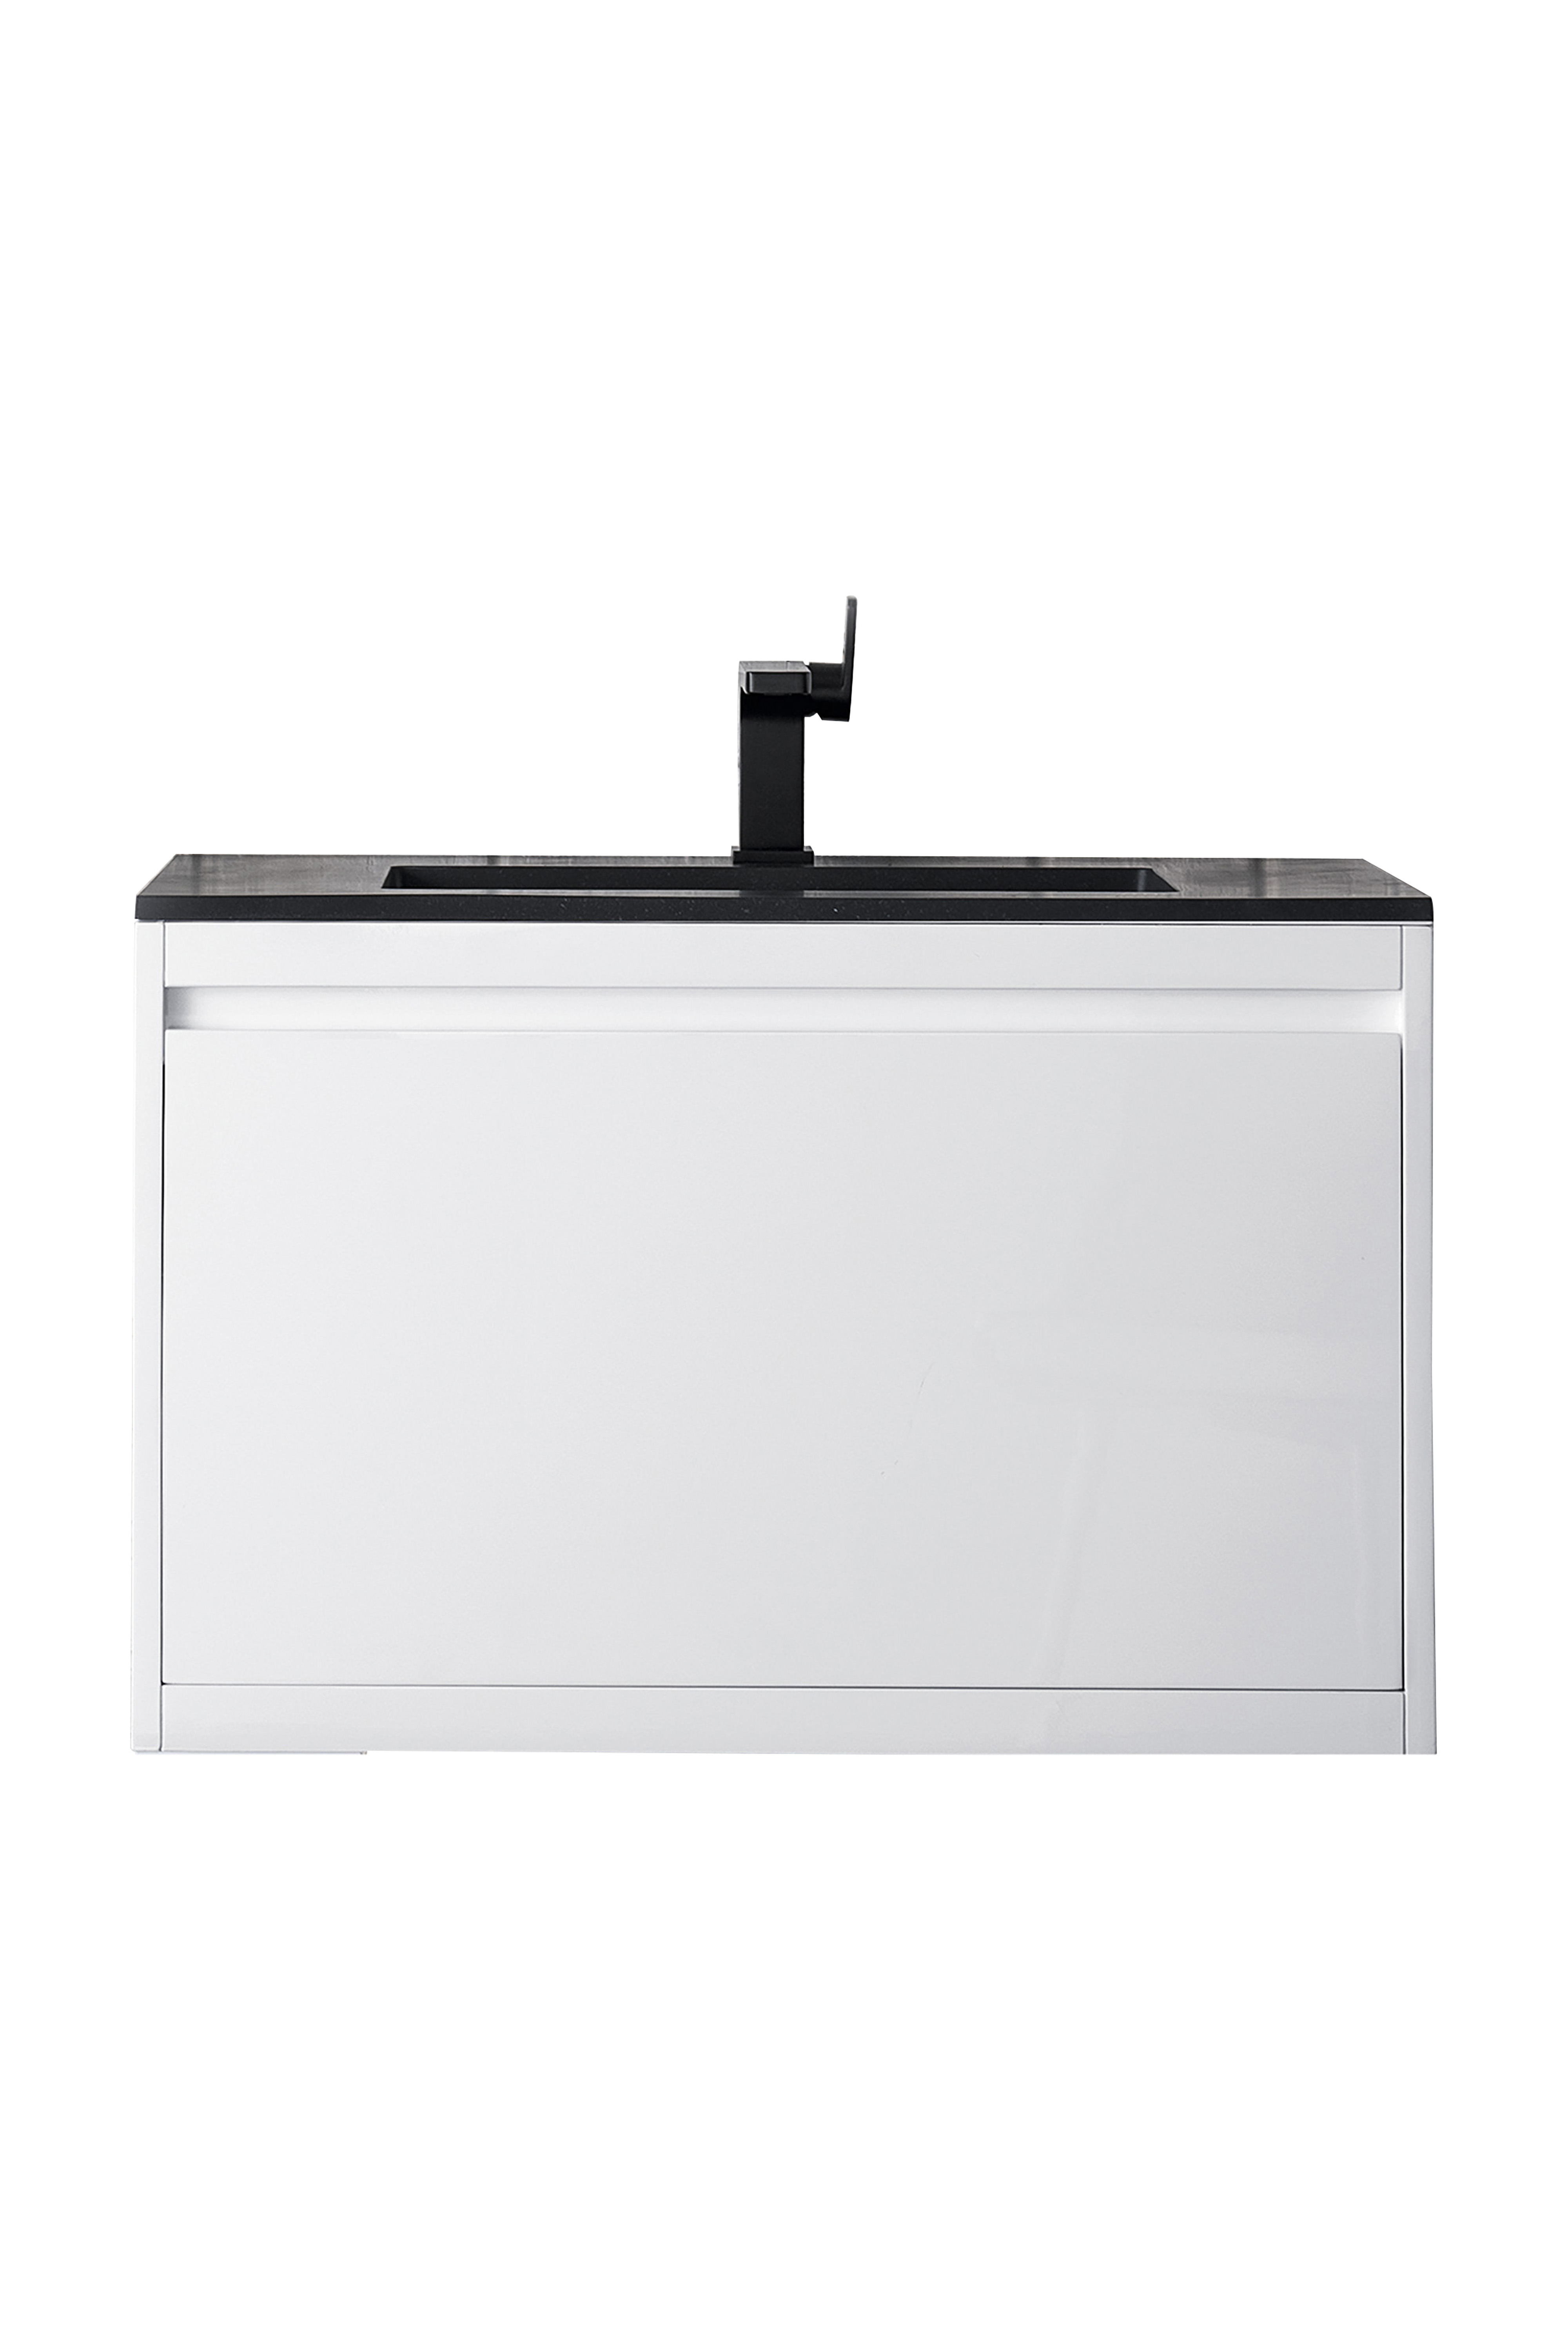 James Martin 801V31.5GWCHB Milan 31.5" Single Vanity Cabinet, Glossy White w/Charcoal Black Composite Top